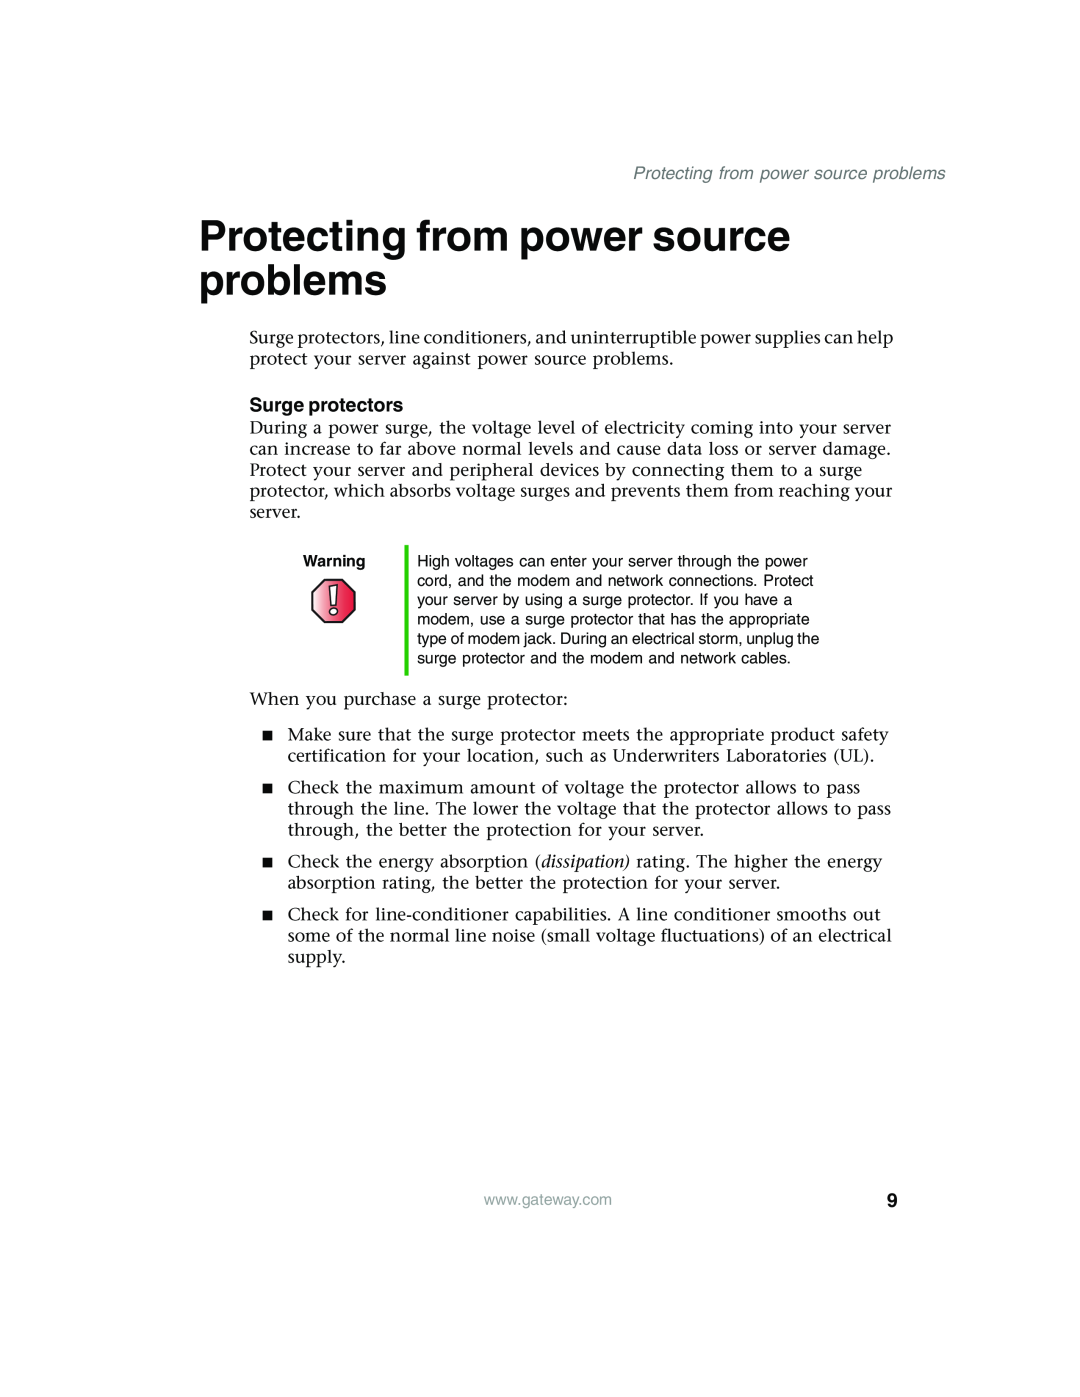 Gateway 955 manual Protecting from power source problems, Surge protectors 